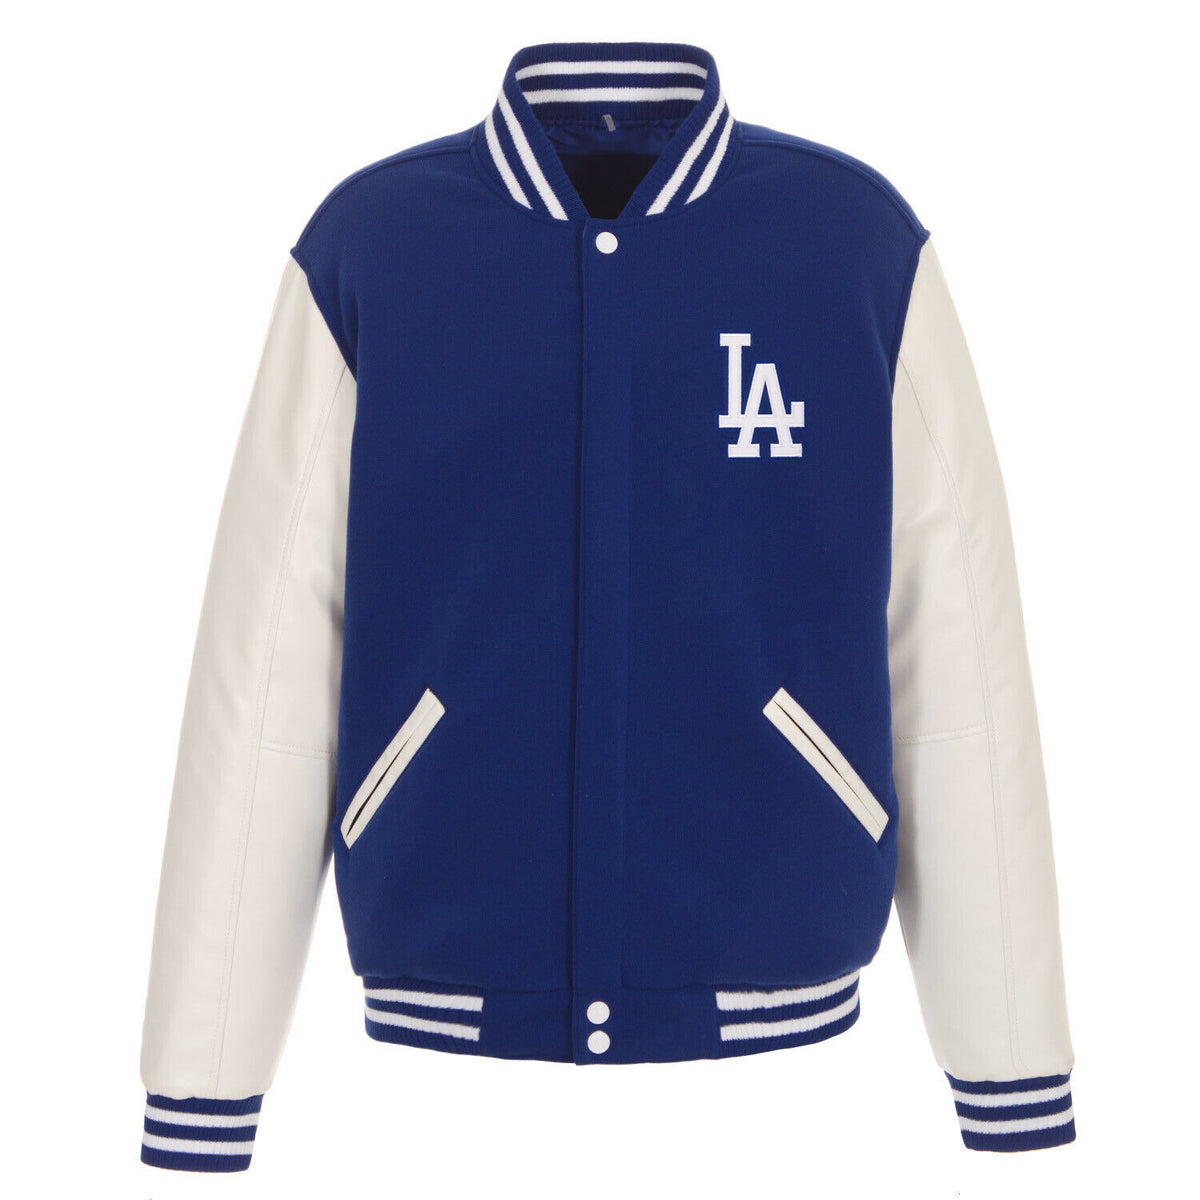 Men's Los Angeles Dodgers Reversible Jacket With Faux Leather Sleeves Royal Bule/White